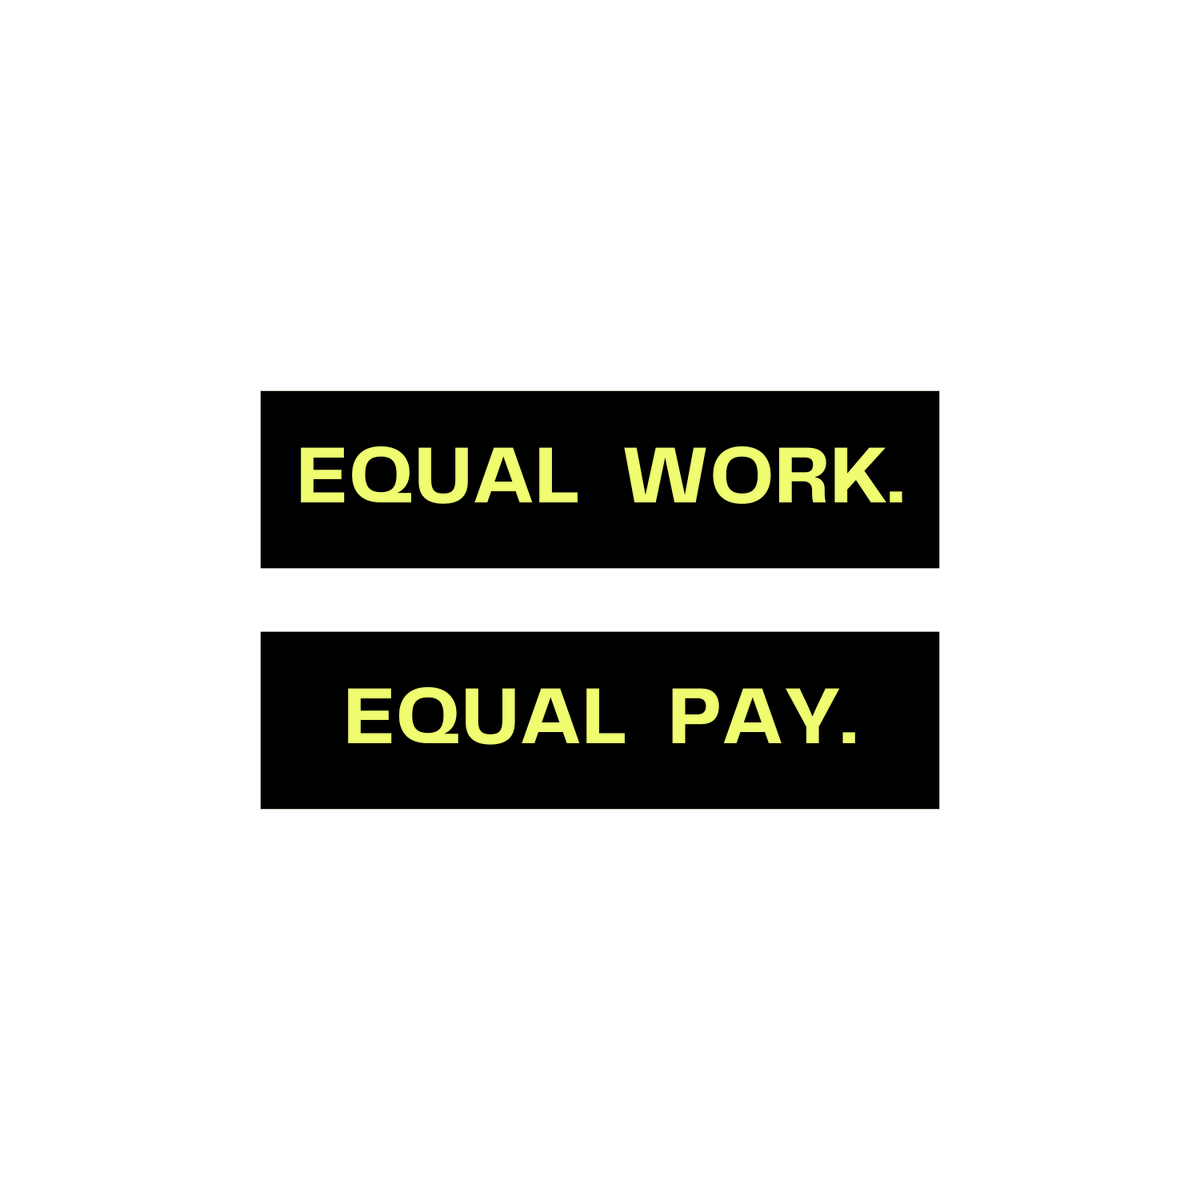 On #EqualPayDay, let's stand for equality in the workplace! 💼💰 Equal work deserves equal pay. Let's break barriers and ensure fairness for all. #EqualPayForEqualWork #GenderEquality #Inclusion #FairPay